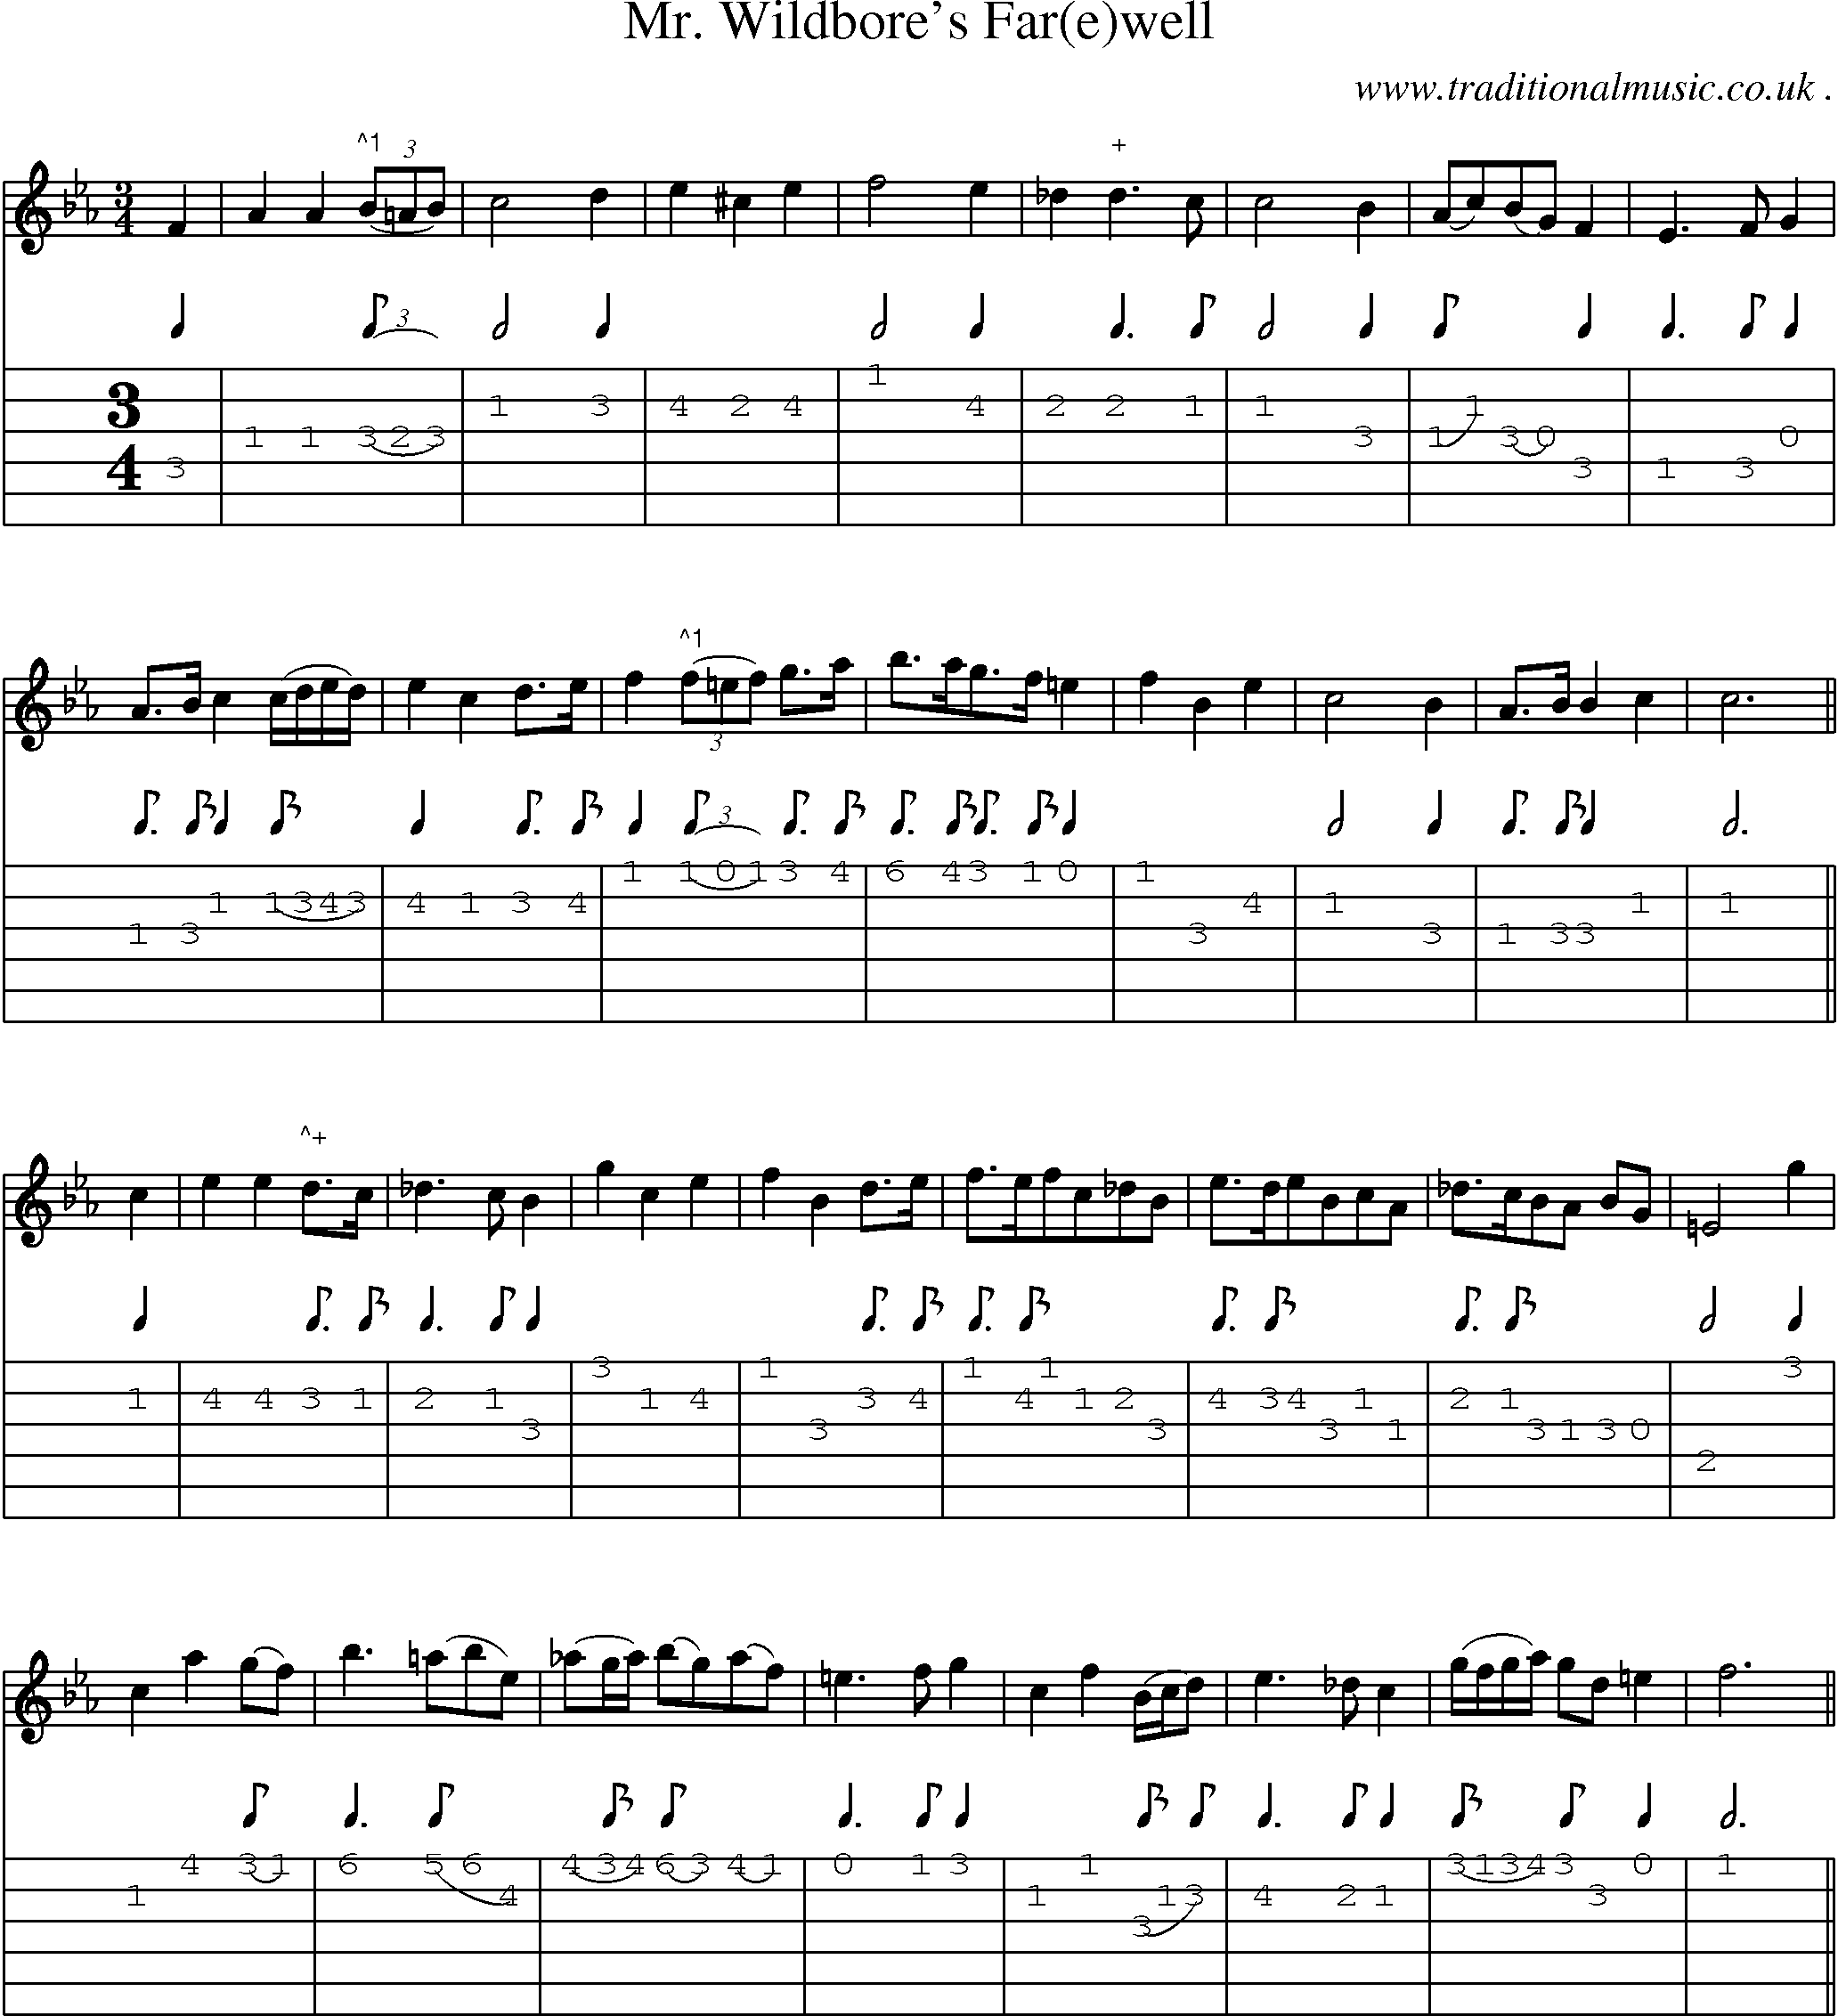 Sheet-Music and Guitar Tabs for Mr Wildbores Far(e)well